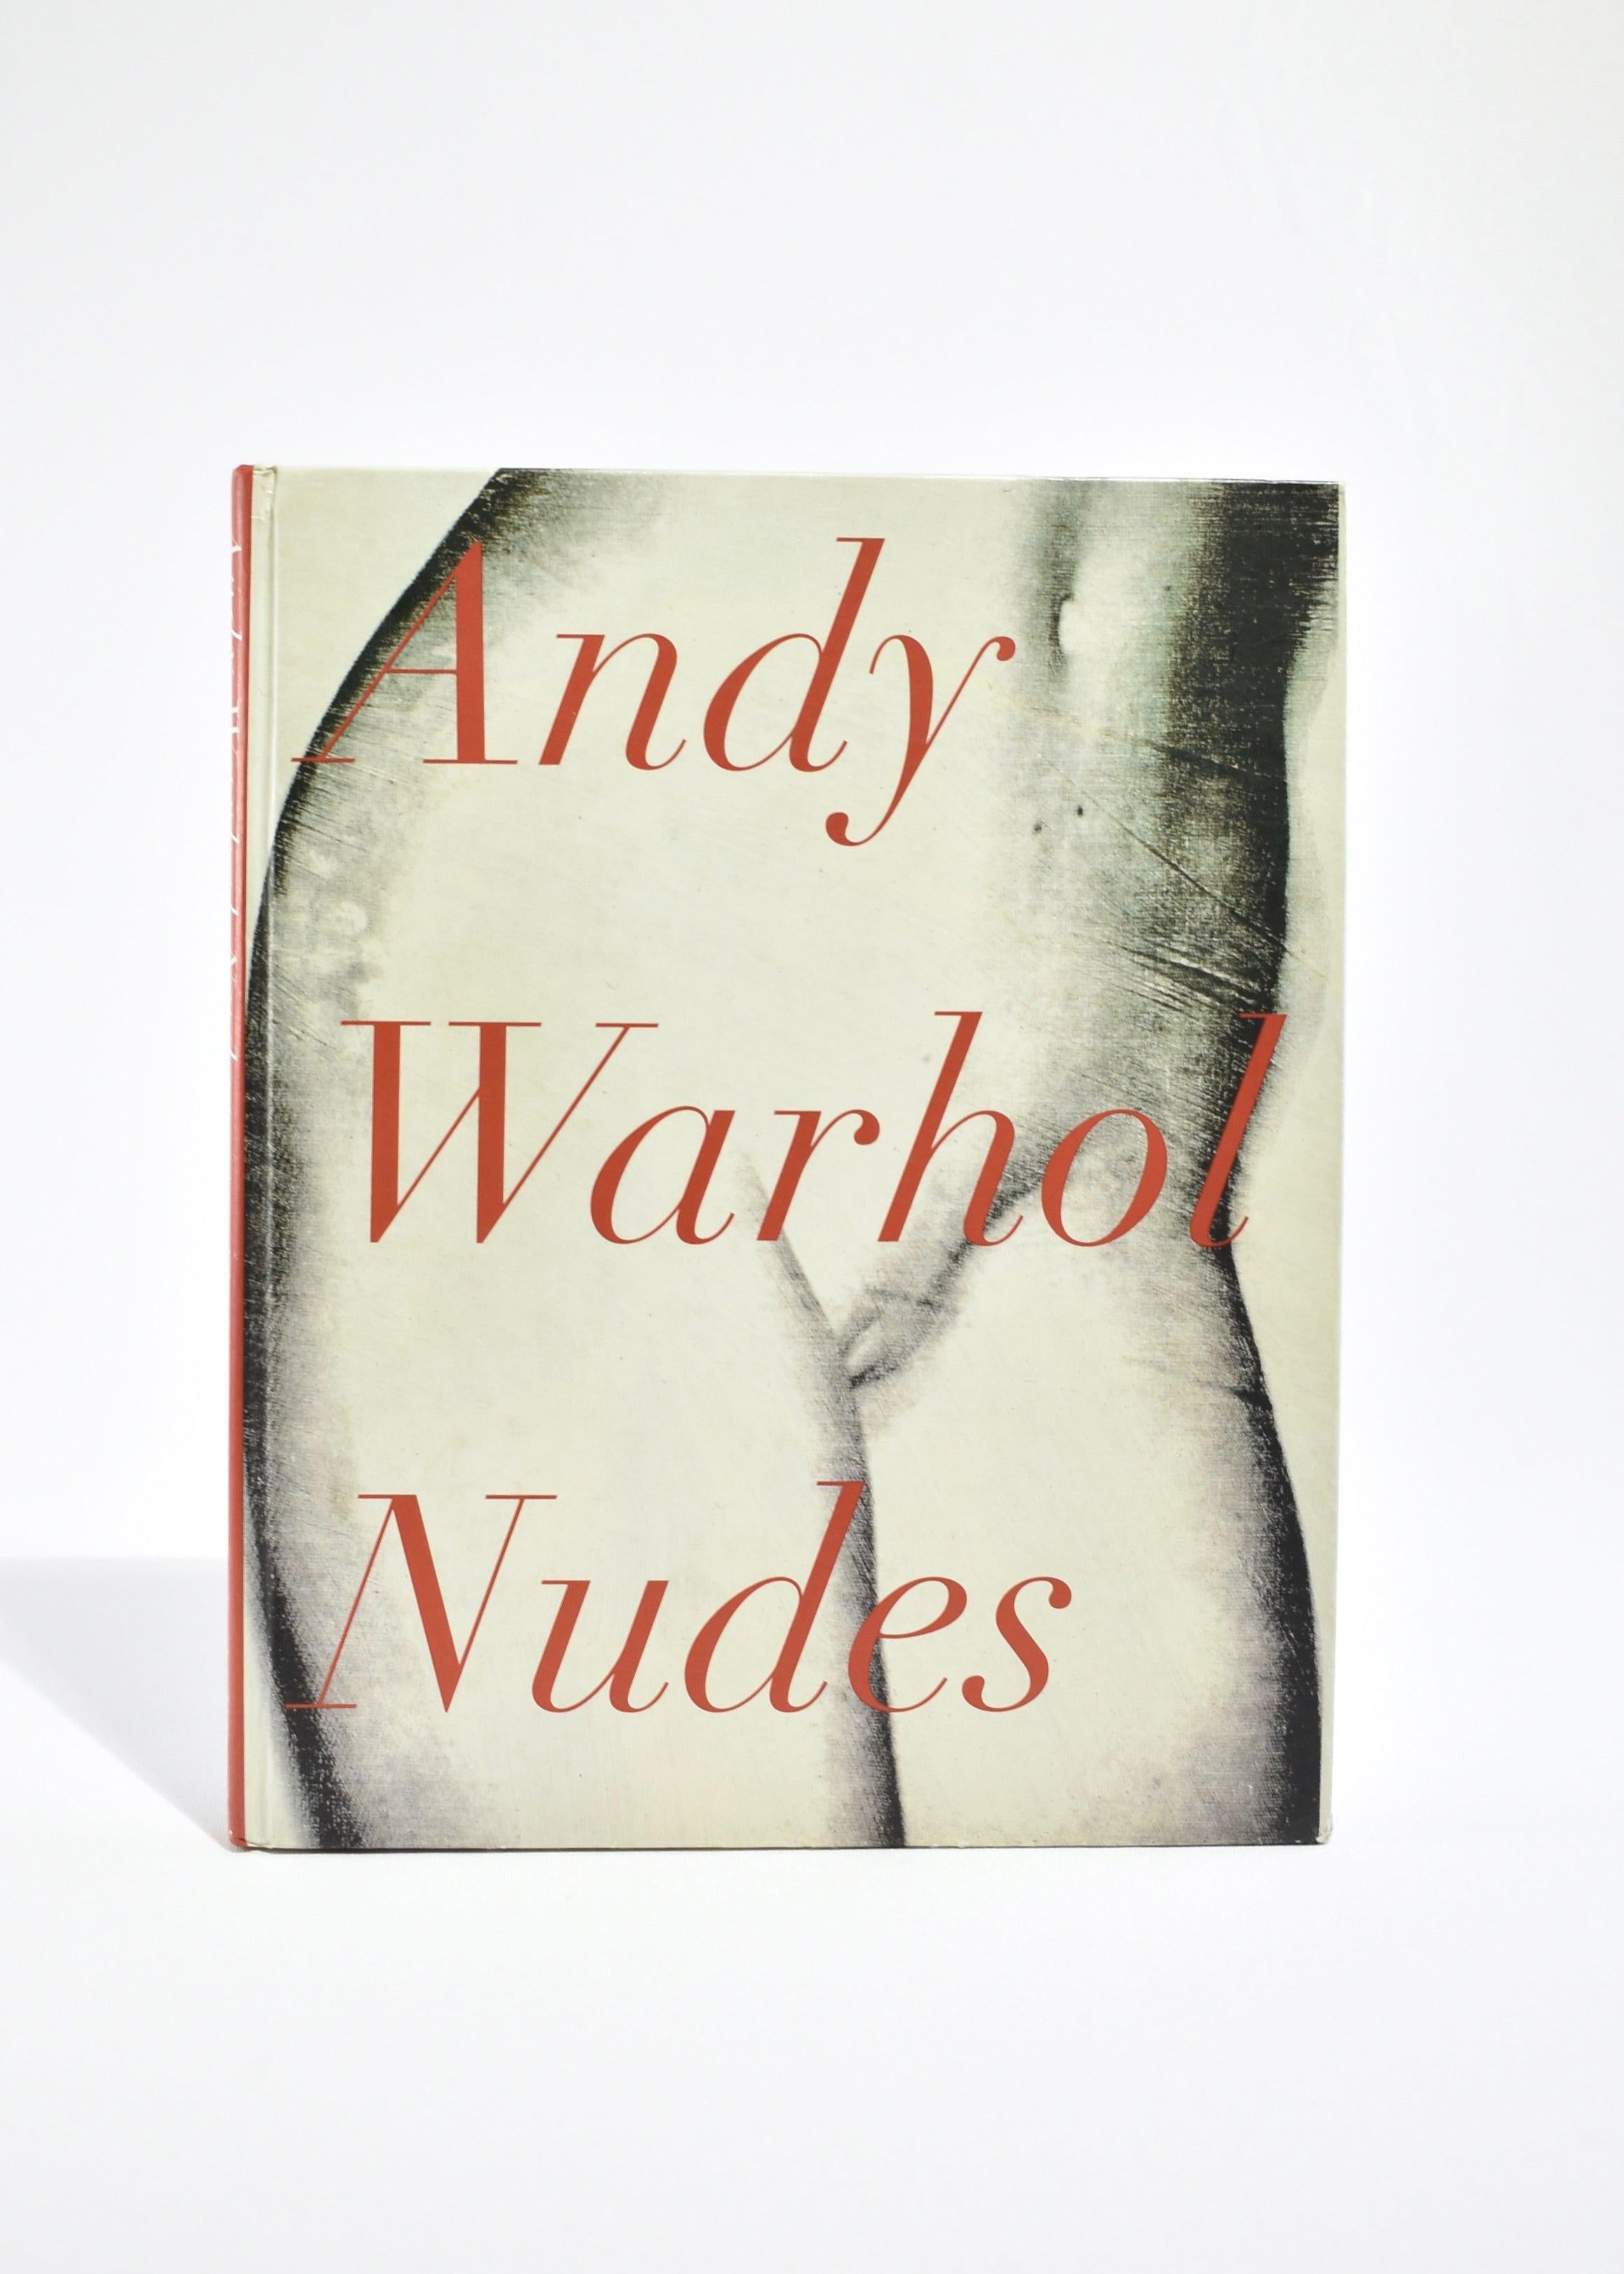 Vintage hardback coffee table book featuring the nude work of artist Andy Warhol. By Linda Nochlin, published in 1995. 1st edition, 53 pages.

